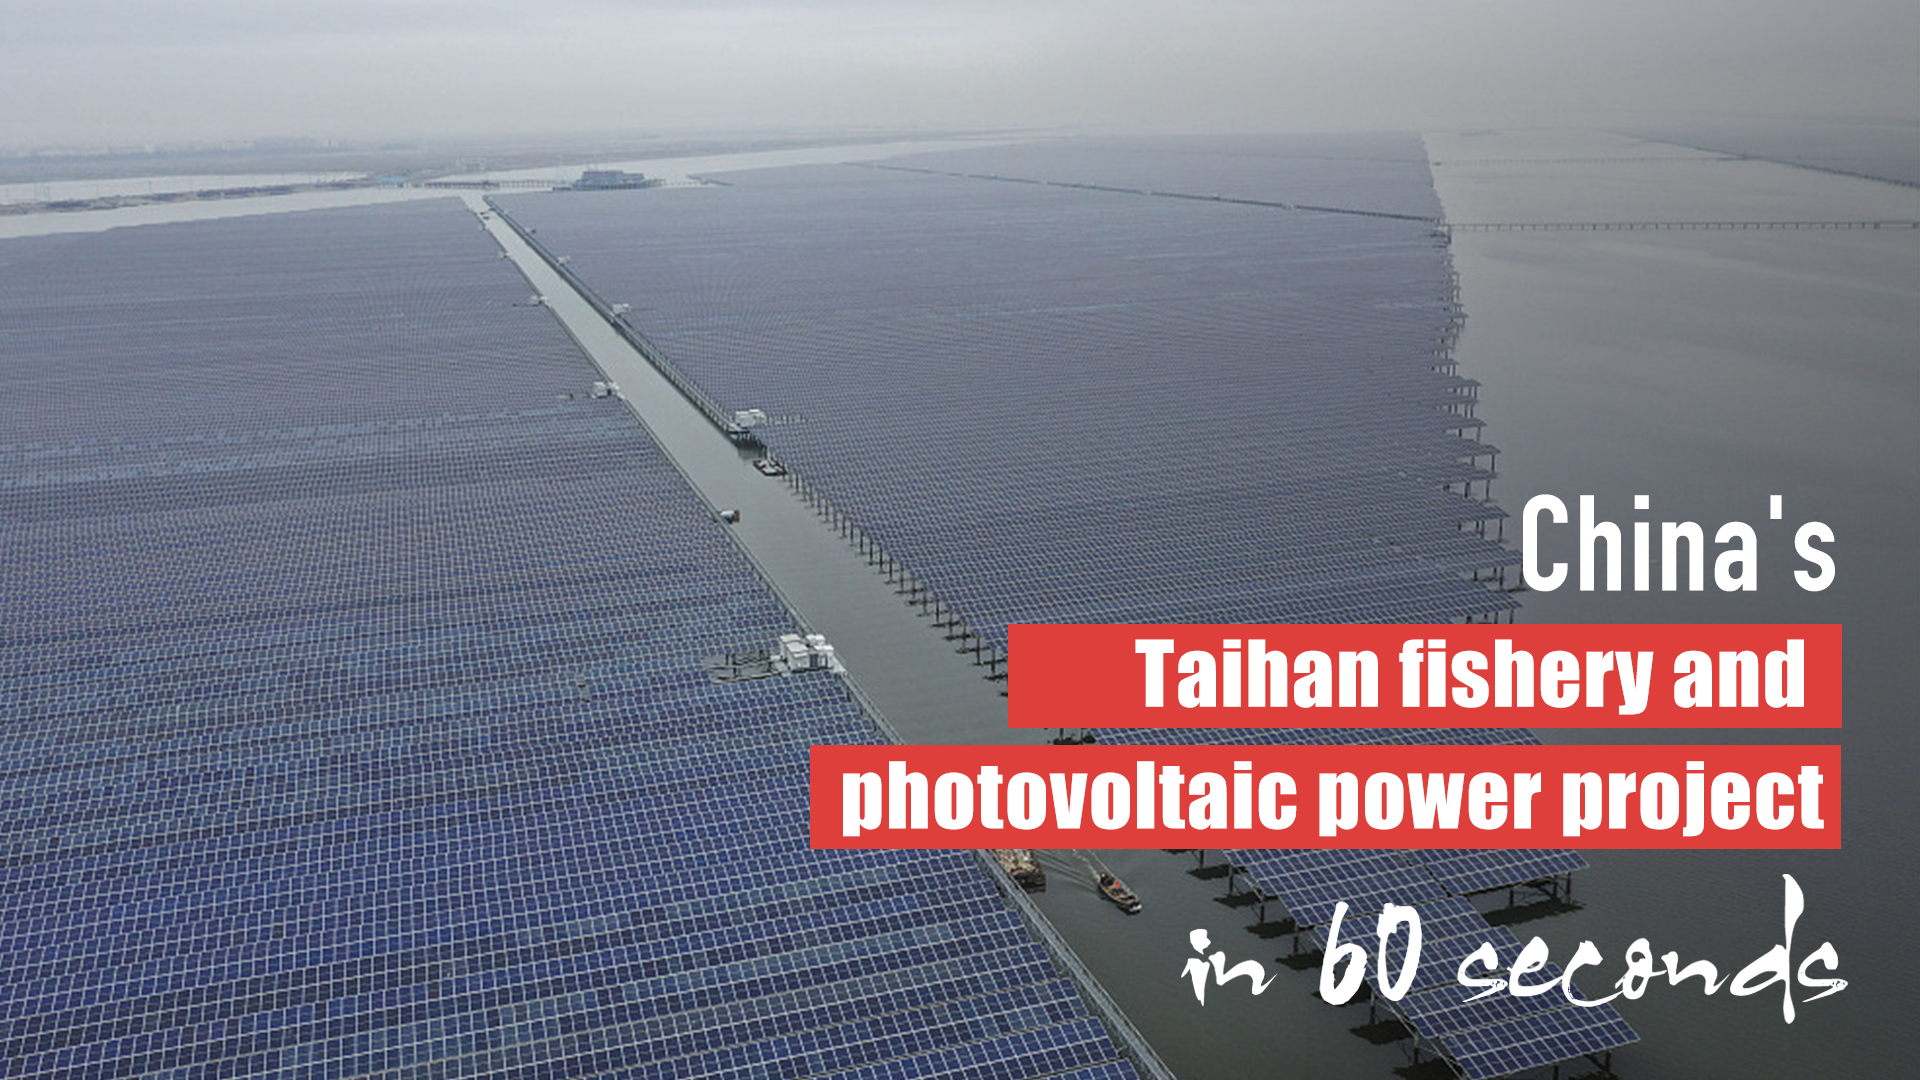 China's Taihan fishery and photovoltaic power project in 60 seconds